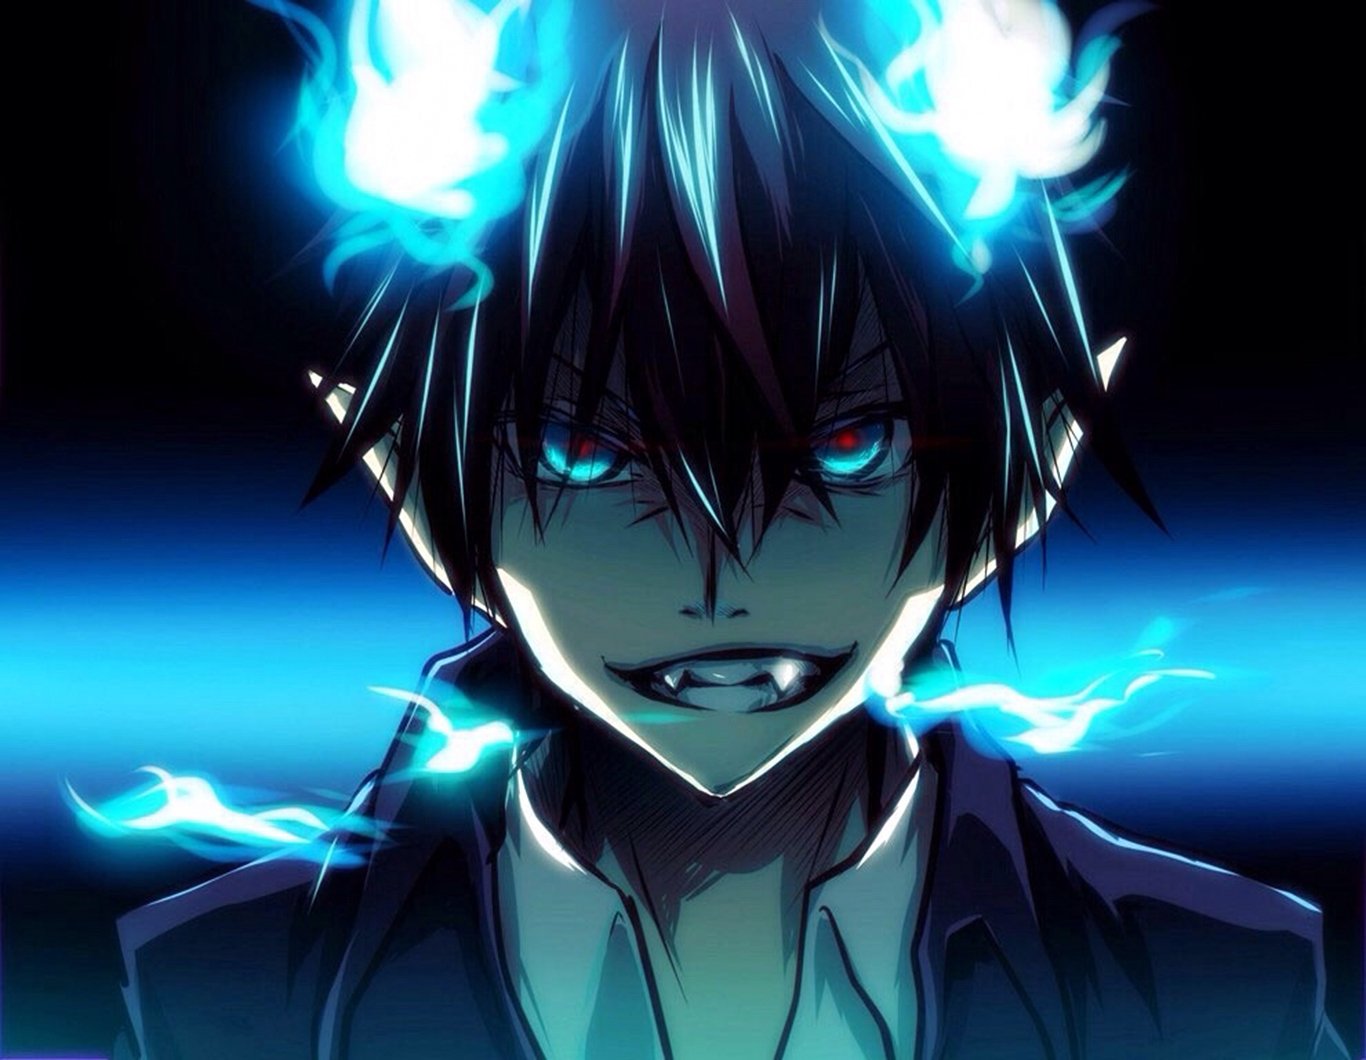 1. "Blue Exorcist" - wide 9